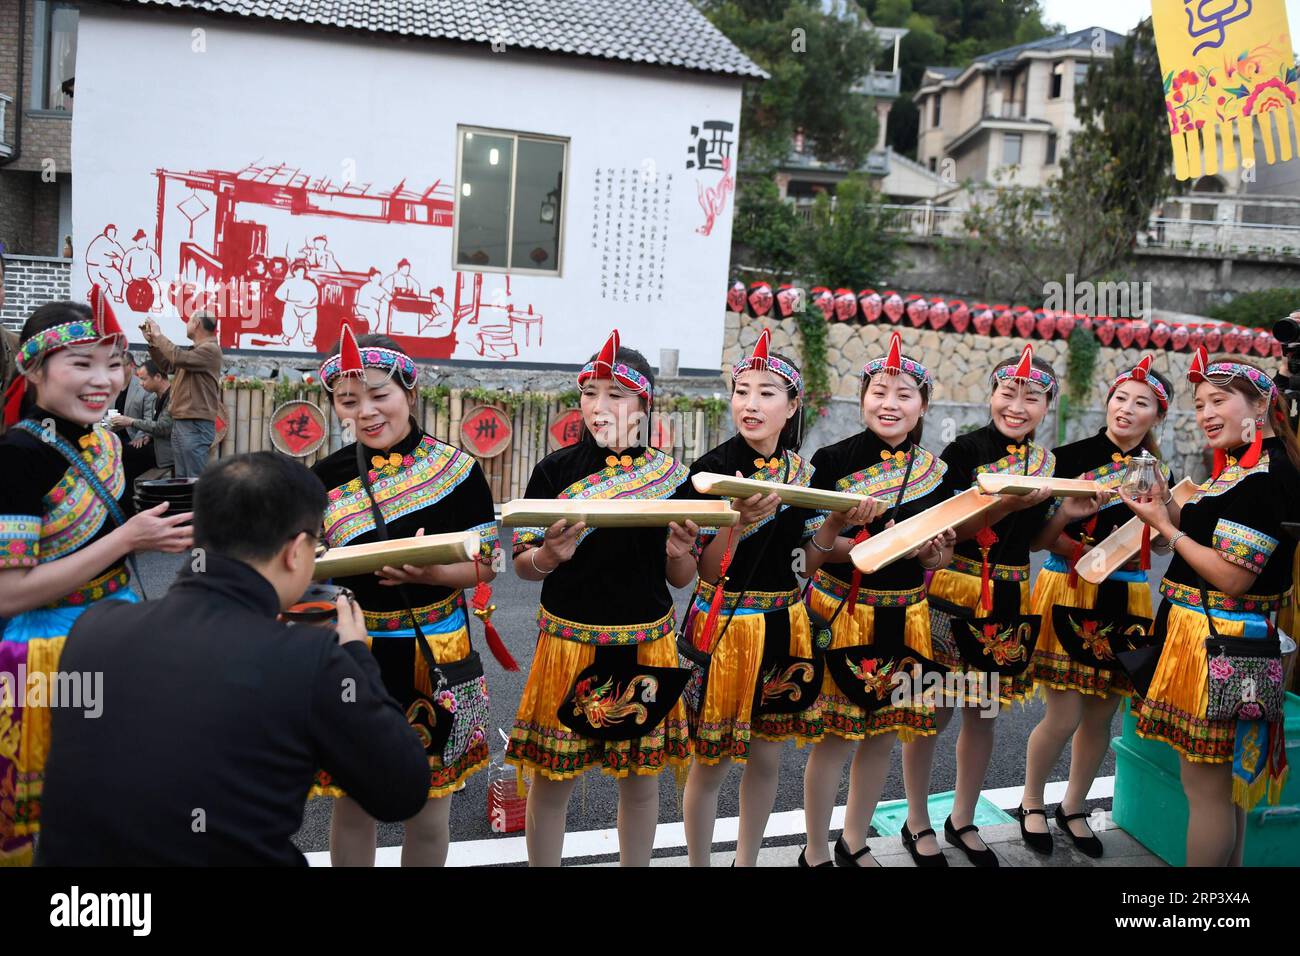 (181018) -- TONGLU, Oct. 18, 2018 (Xinhua) -- Local residents dressed in traditional costumes toast a tourist taking part in the long-table banquet held at Longfeng Ethnic Village in Eshan Township of the She ethnic group of Tonglu County, east China s Zhejiang Province, Oct. 17, 2018. A total of 100 tables of delicacies were presented at the long-table banquet along a street held at the village, attracting local residents as well as tourists to enjoy the food of the She ethnic group. (Xinhua/Huang Zongzhi)(sxk) CHINA-ZHEJIANG-TONGLU-LONG-TABLE BANQUET (CN) PUBLICATIONxNOTxINxCHN Stock Photo